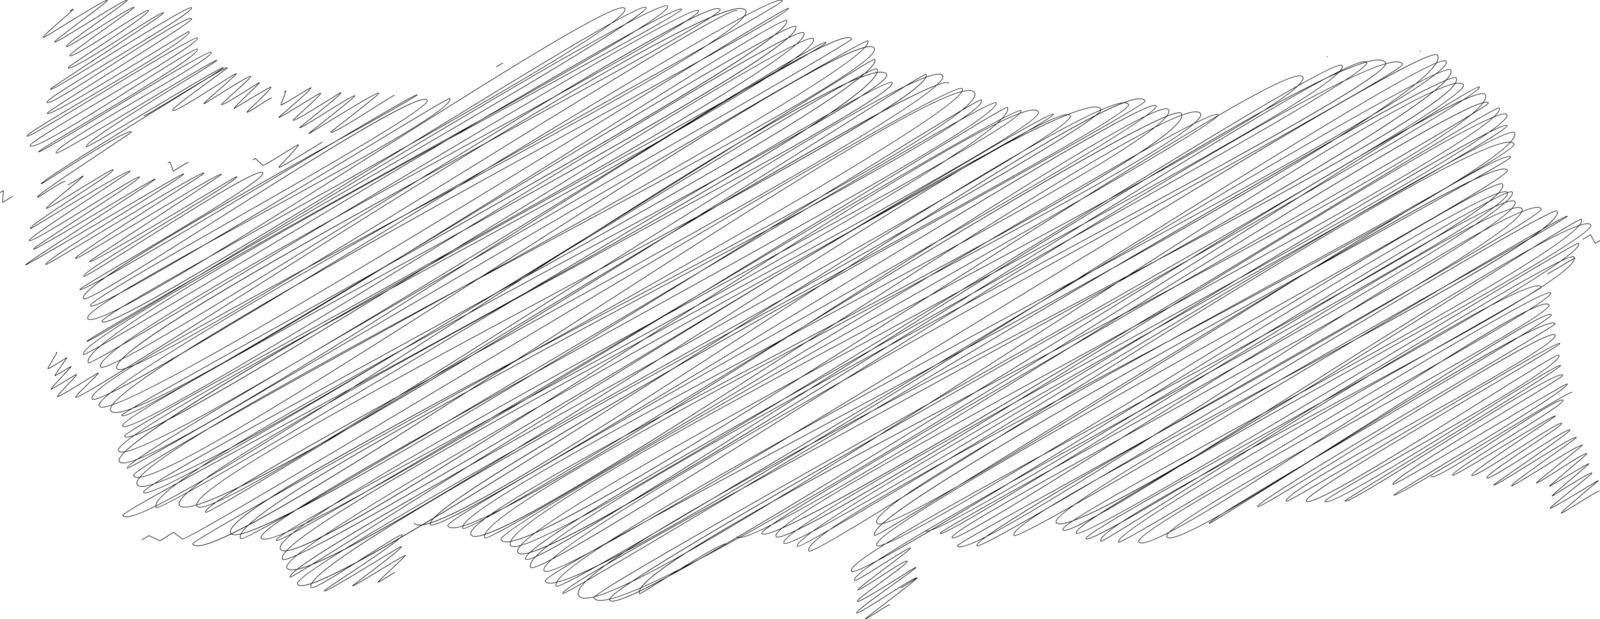 Turkey - pencil scribble sketch silhouette map of country area with dropped shadow. Simple flat vector illustration.